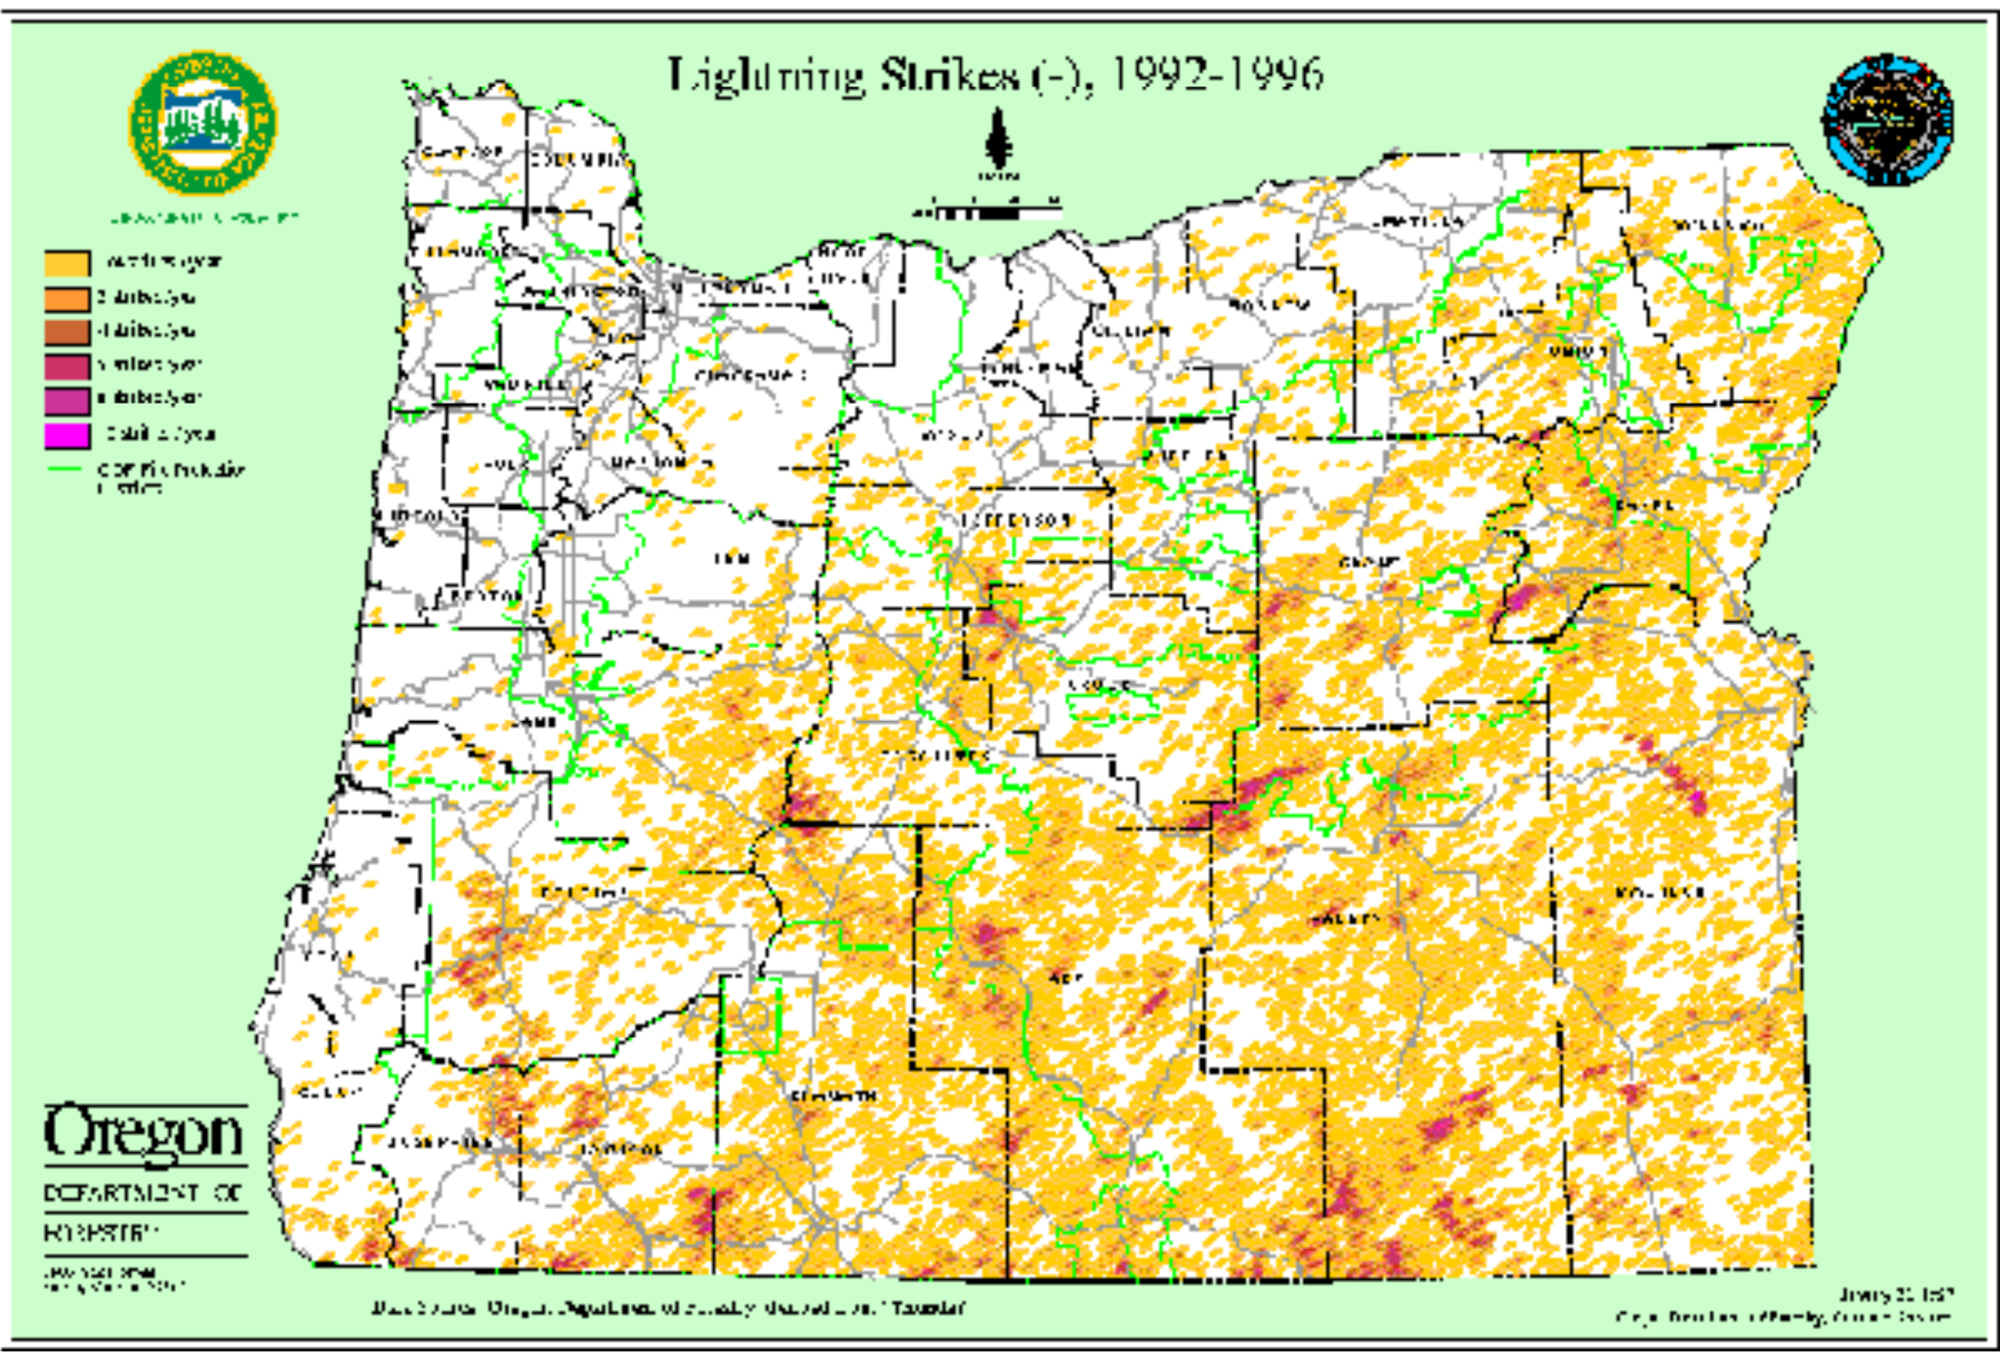 Nw Maps Co Zybach Presentation Oregon Wildfires August 27 2014